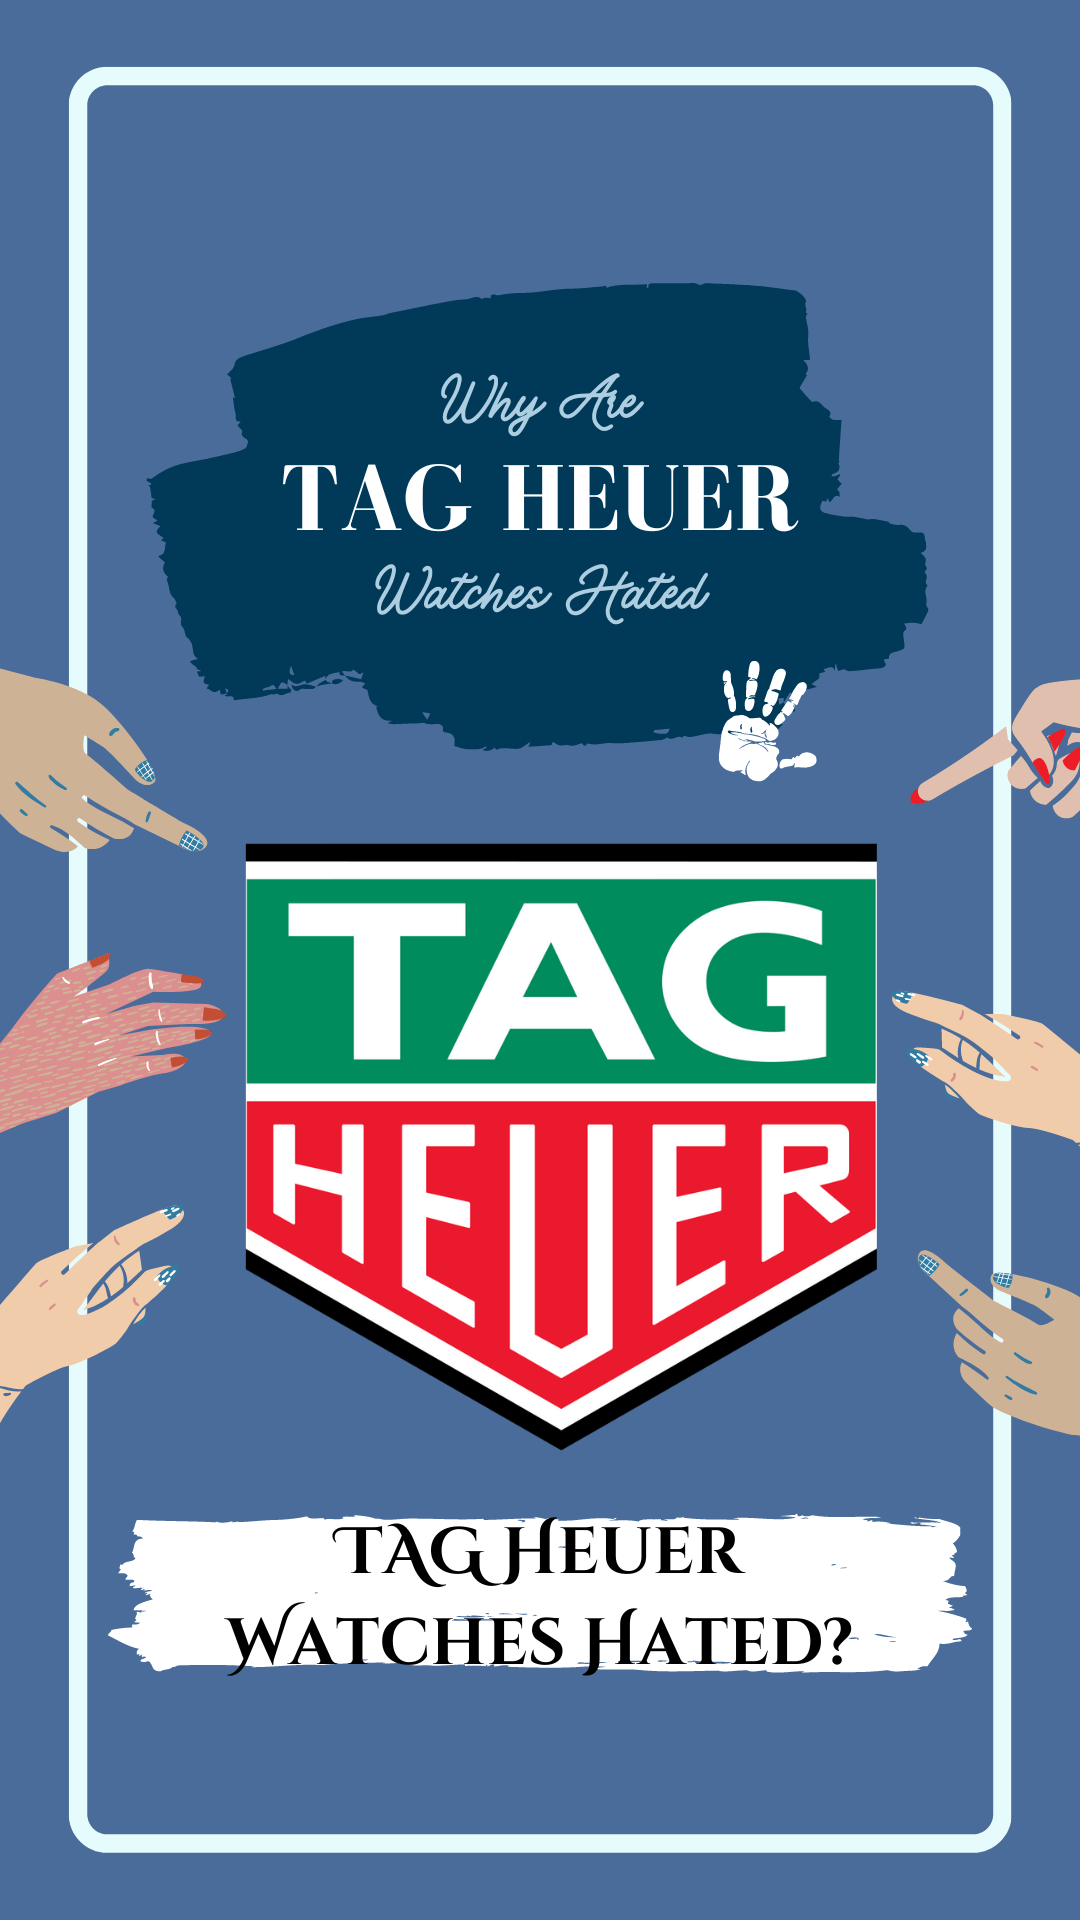 Why Are TAG Heuer Watches Hated?